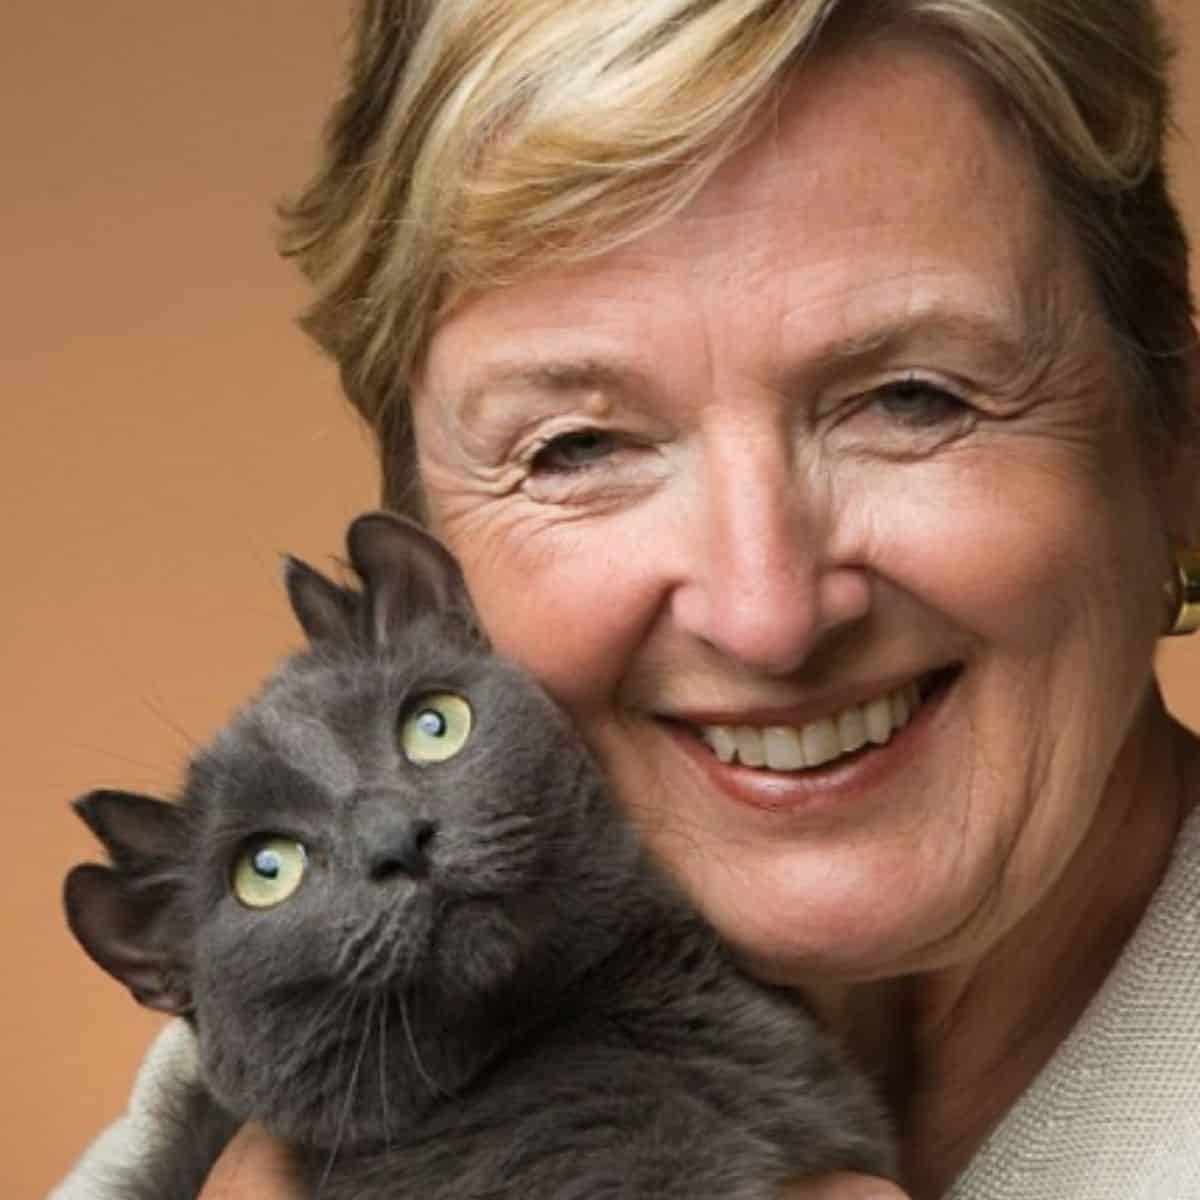 photo of yoda, the four eared cat, and his owner